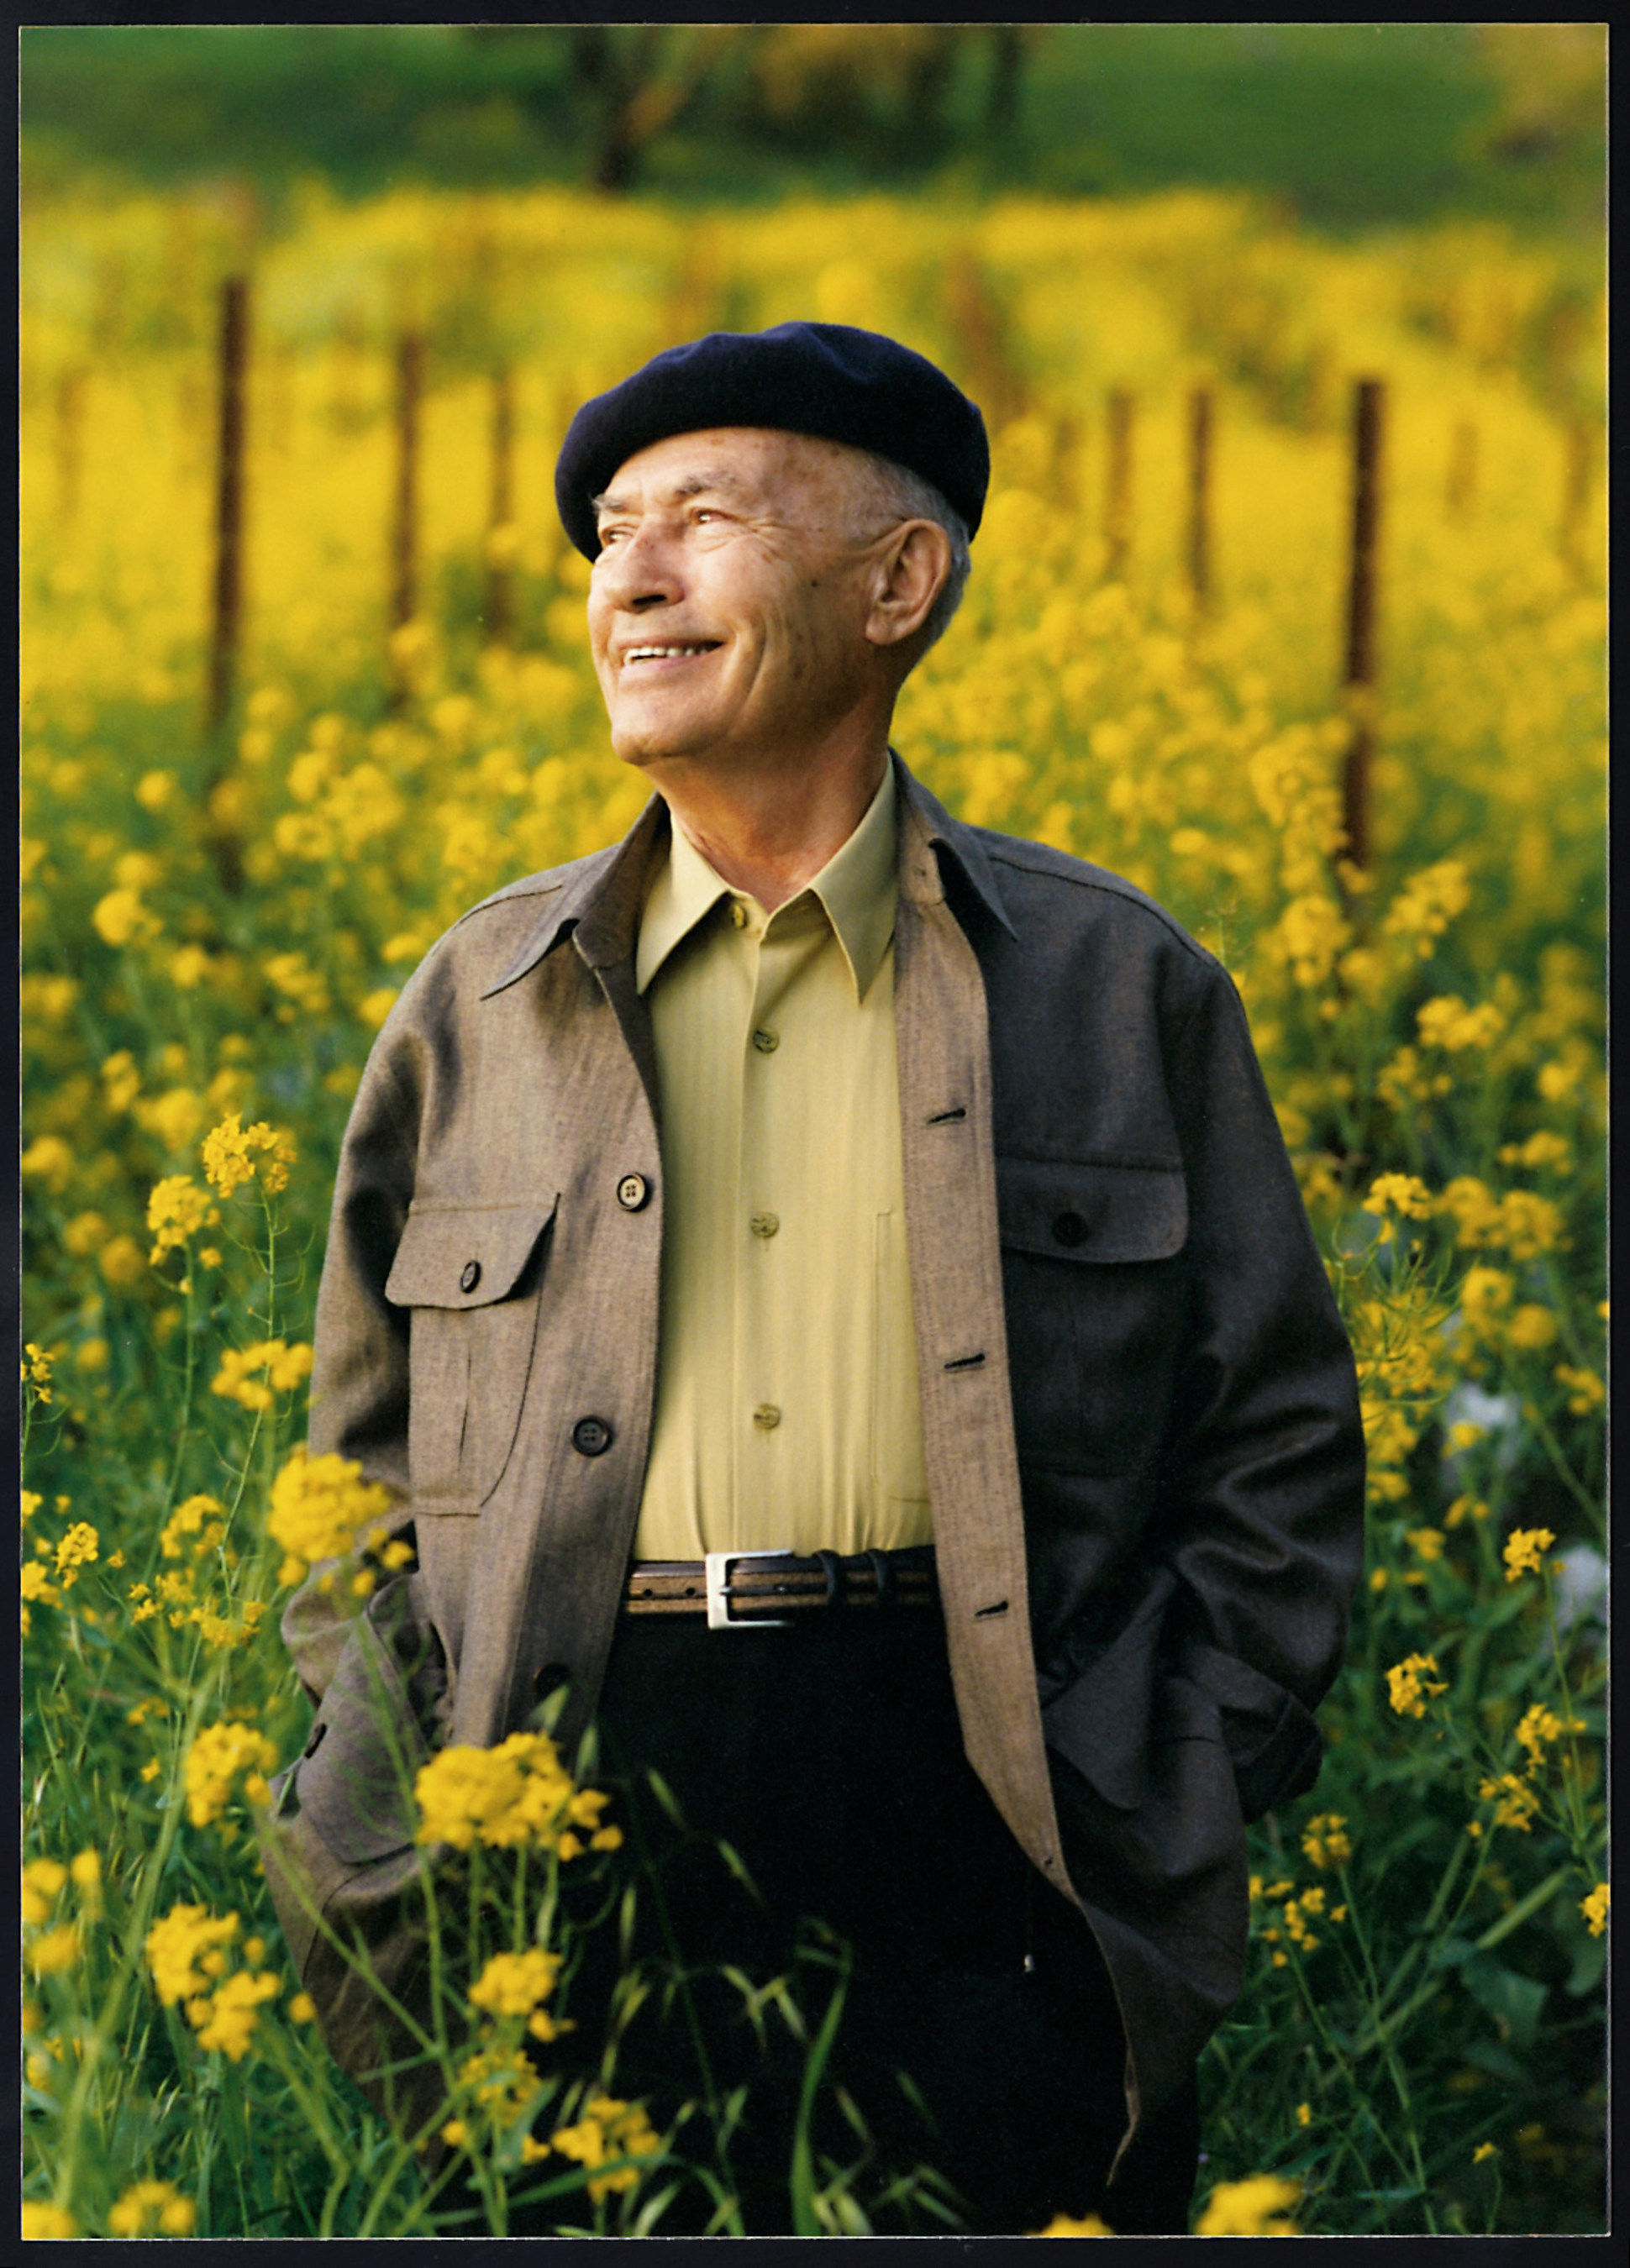 Miljenko "Mike" Grgich became known as "The King of Chardonnay" after his wine won the Great Chicago Chardonnay Showdown.